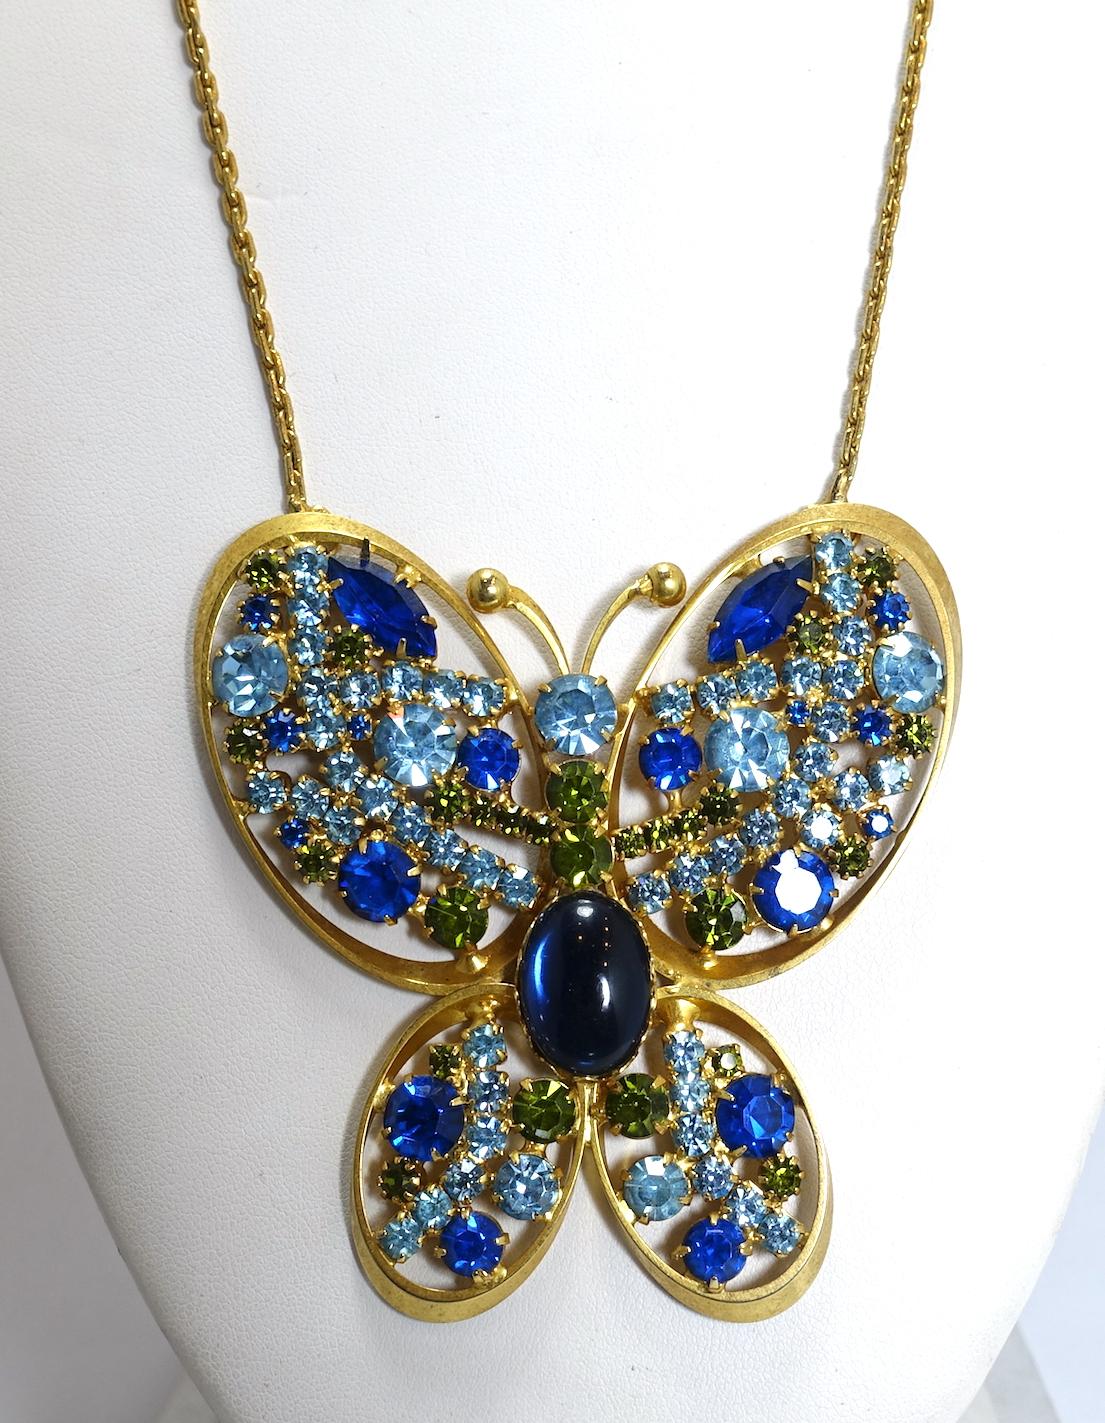 This vintage necklace features a huge butterfly with a large center blue cabochon stone in the middle.  It’s accented with blue and green crystals in a gold tone setting.  The centerpiece measures 3-1/4” x 3” and the chain is 22” x 1/8”.  This